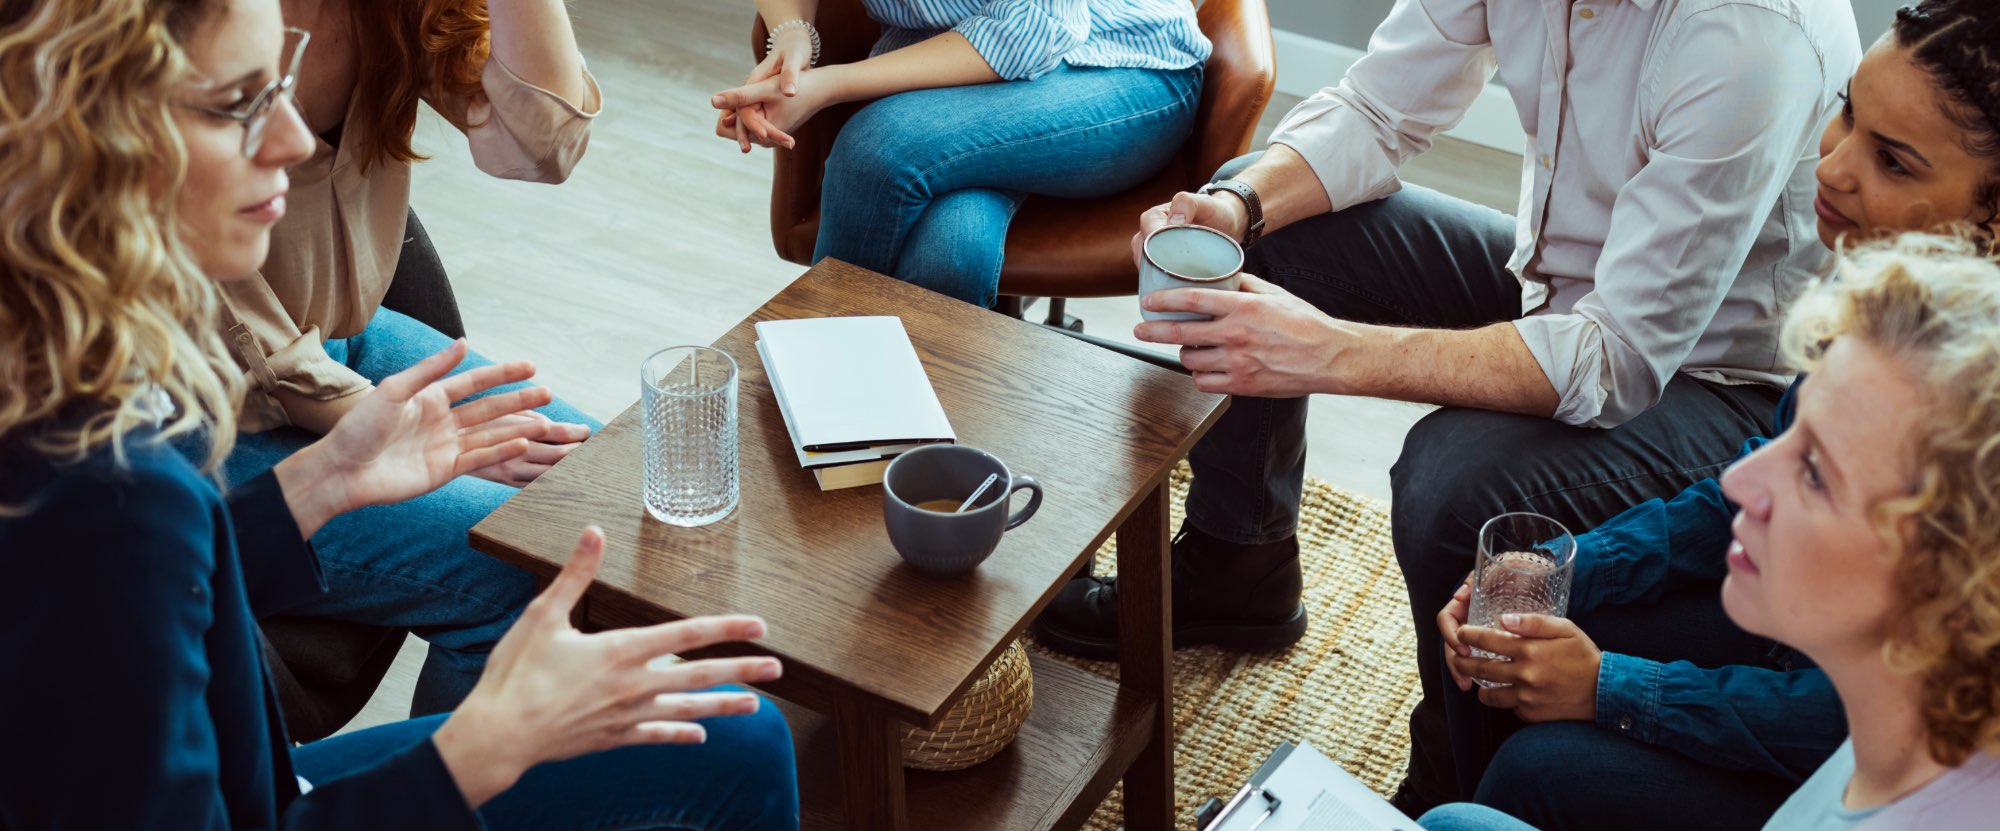 A group of adults are sitting around a coffee table. They are listening to a woman speak. She is gesturing and they are deep in discussion. They look interested in what the woman is saying to them.